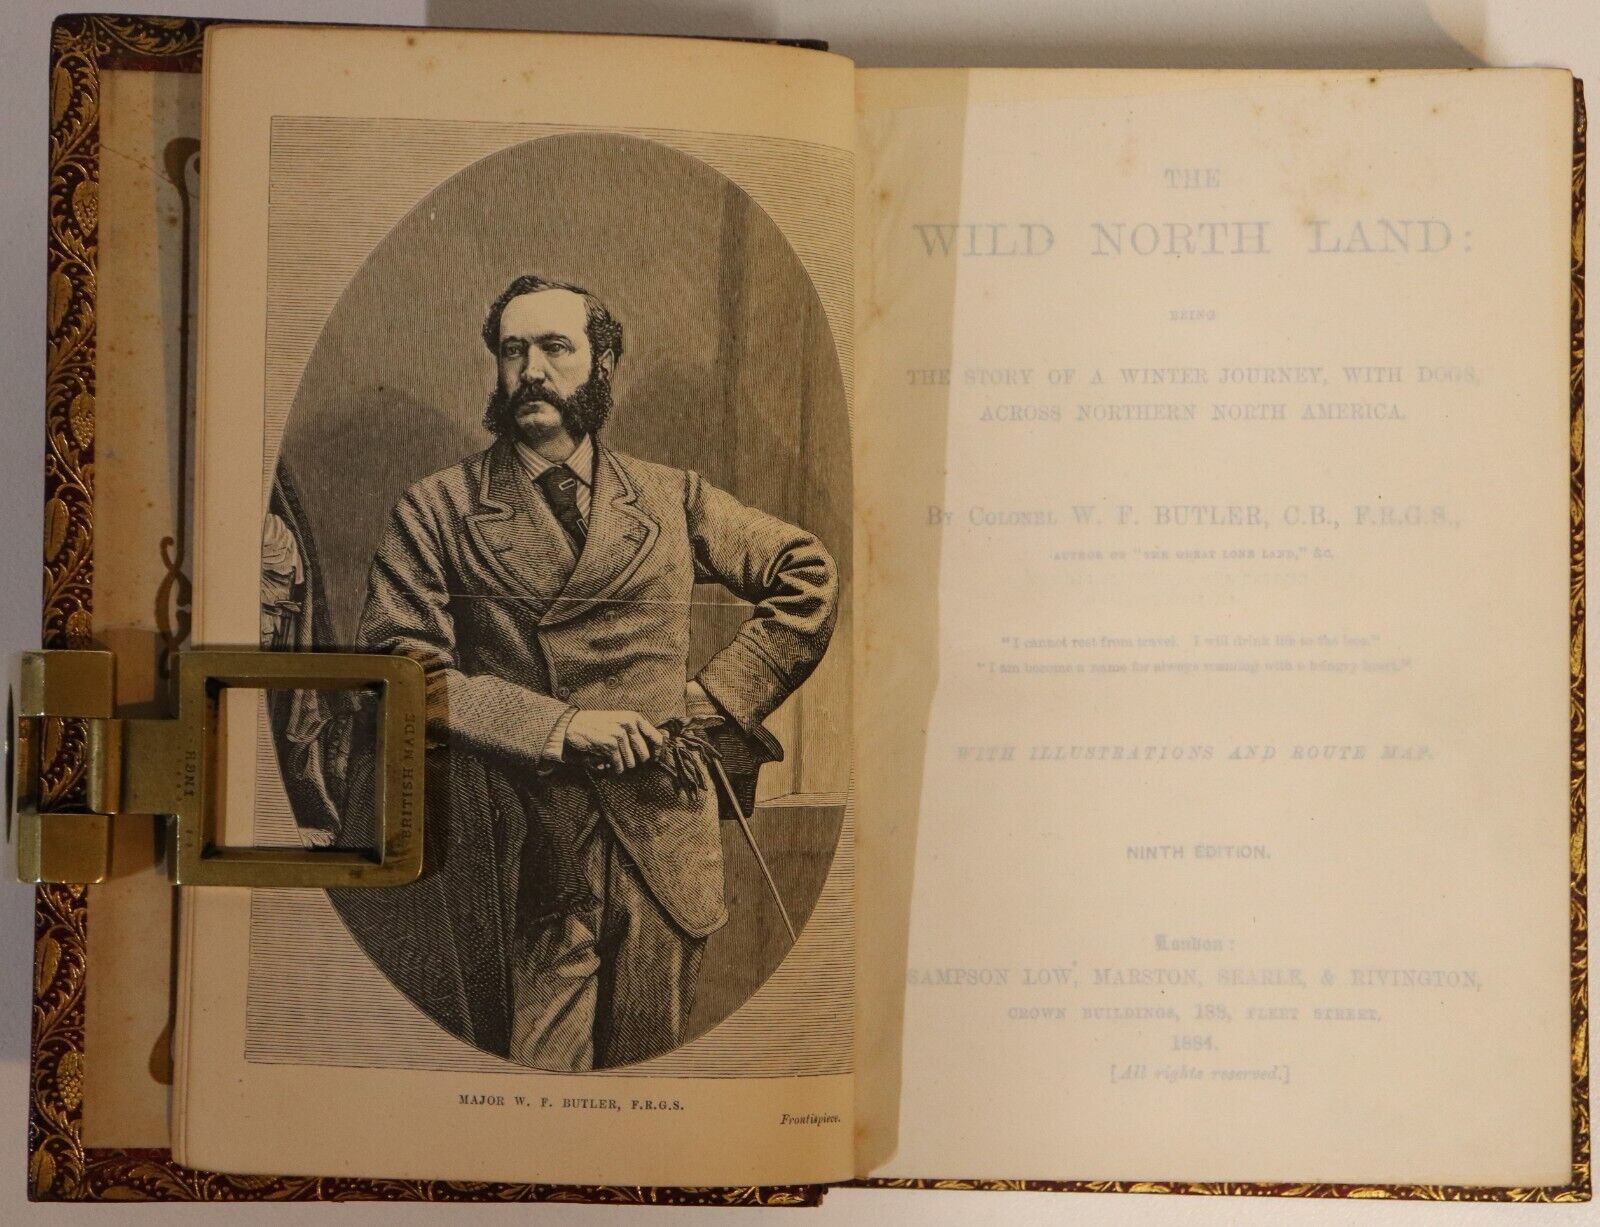 The Wild North Land by W.F. Butler - 1884 - Antique Exploration Adventure Book - 0